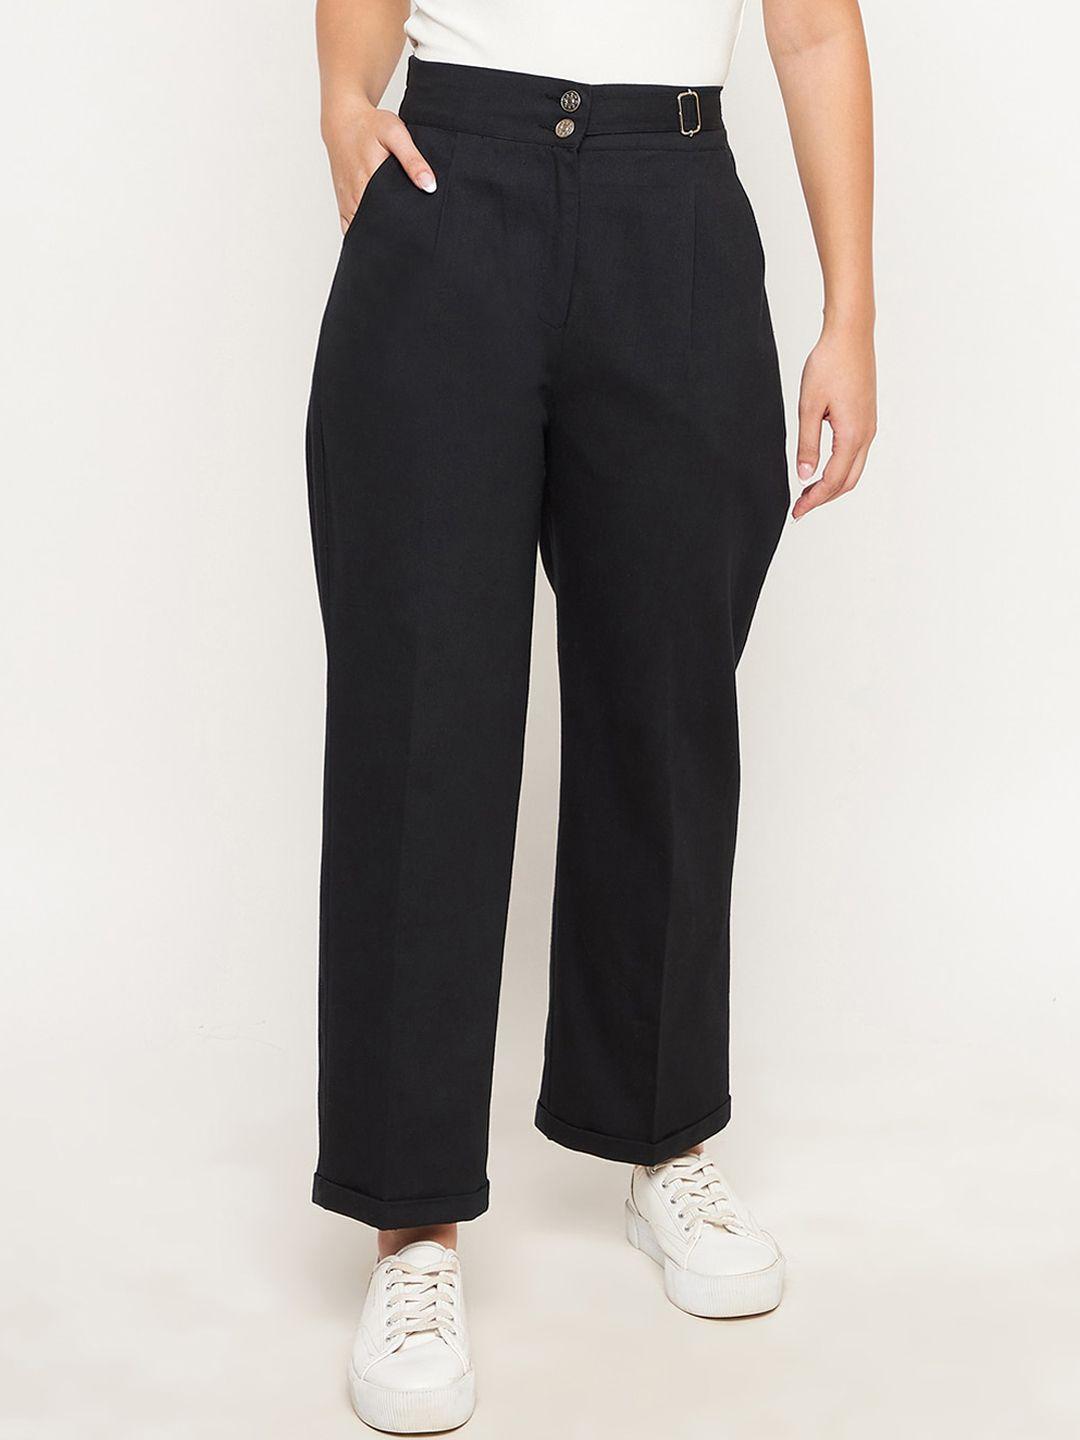 winered-women-black-solid-easy-wash-trousers-with-buckle